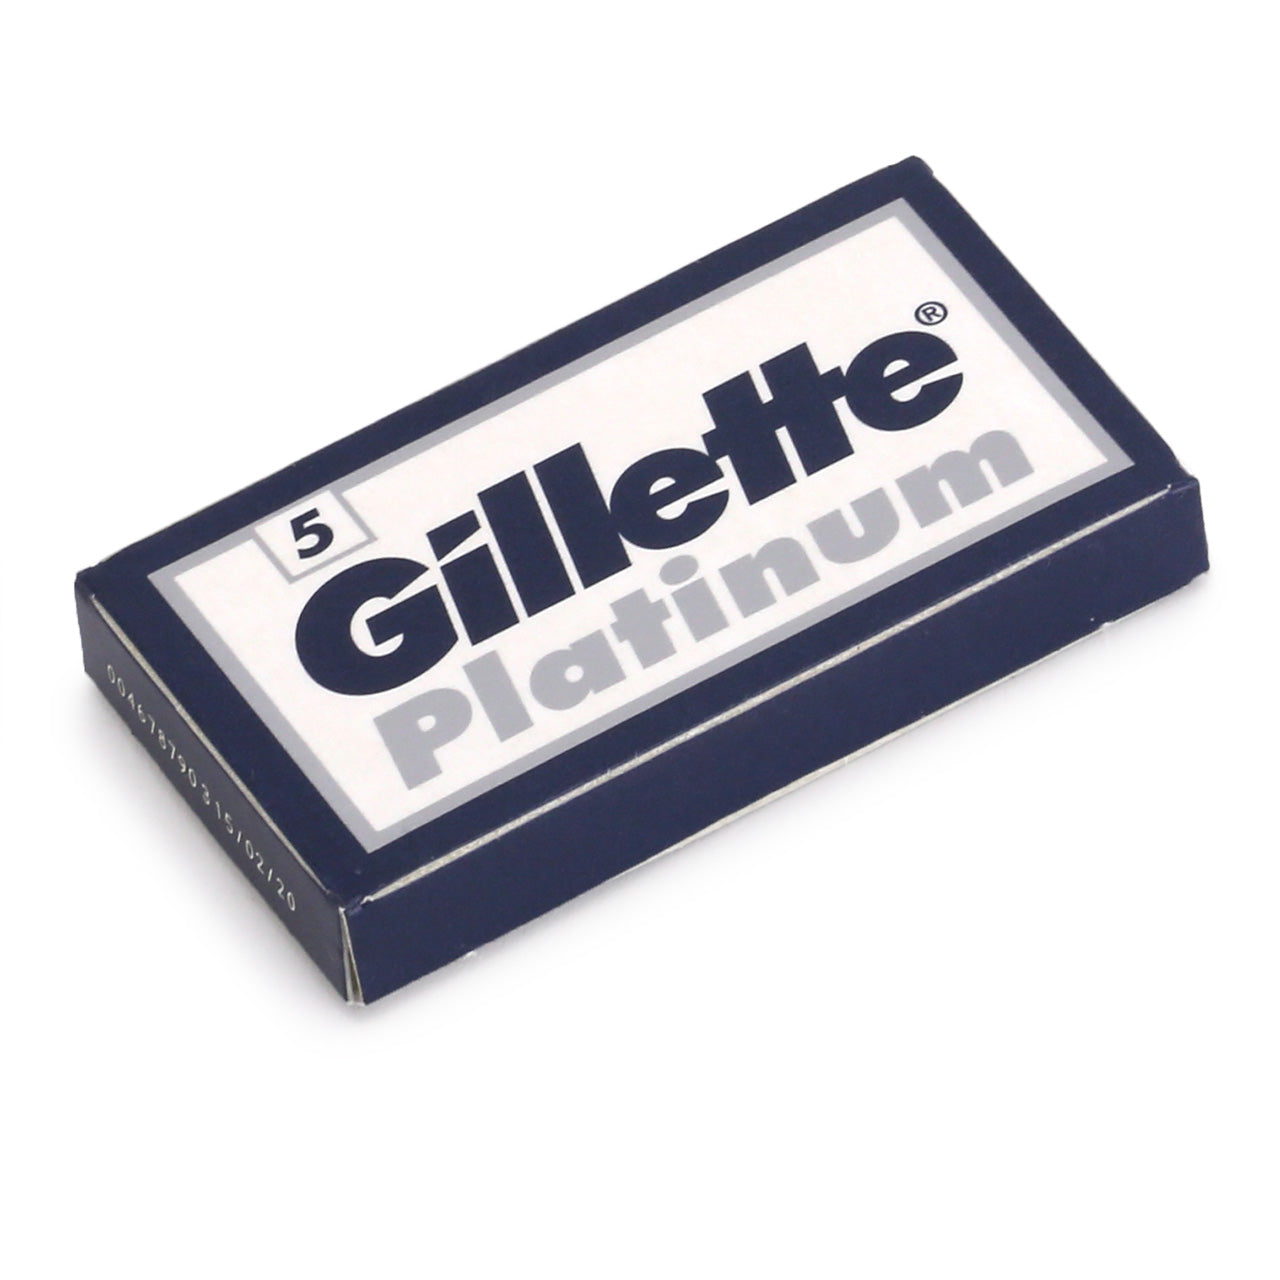 an unfolded pack of Gillette Platinum Double edge blades. 20 tucks of 5 blades inside a fold-up cardboard packet